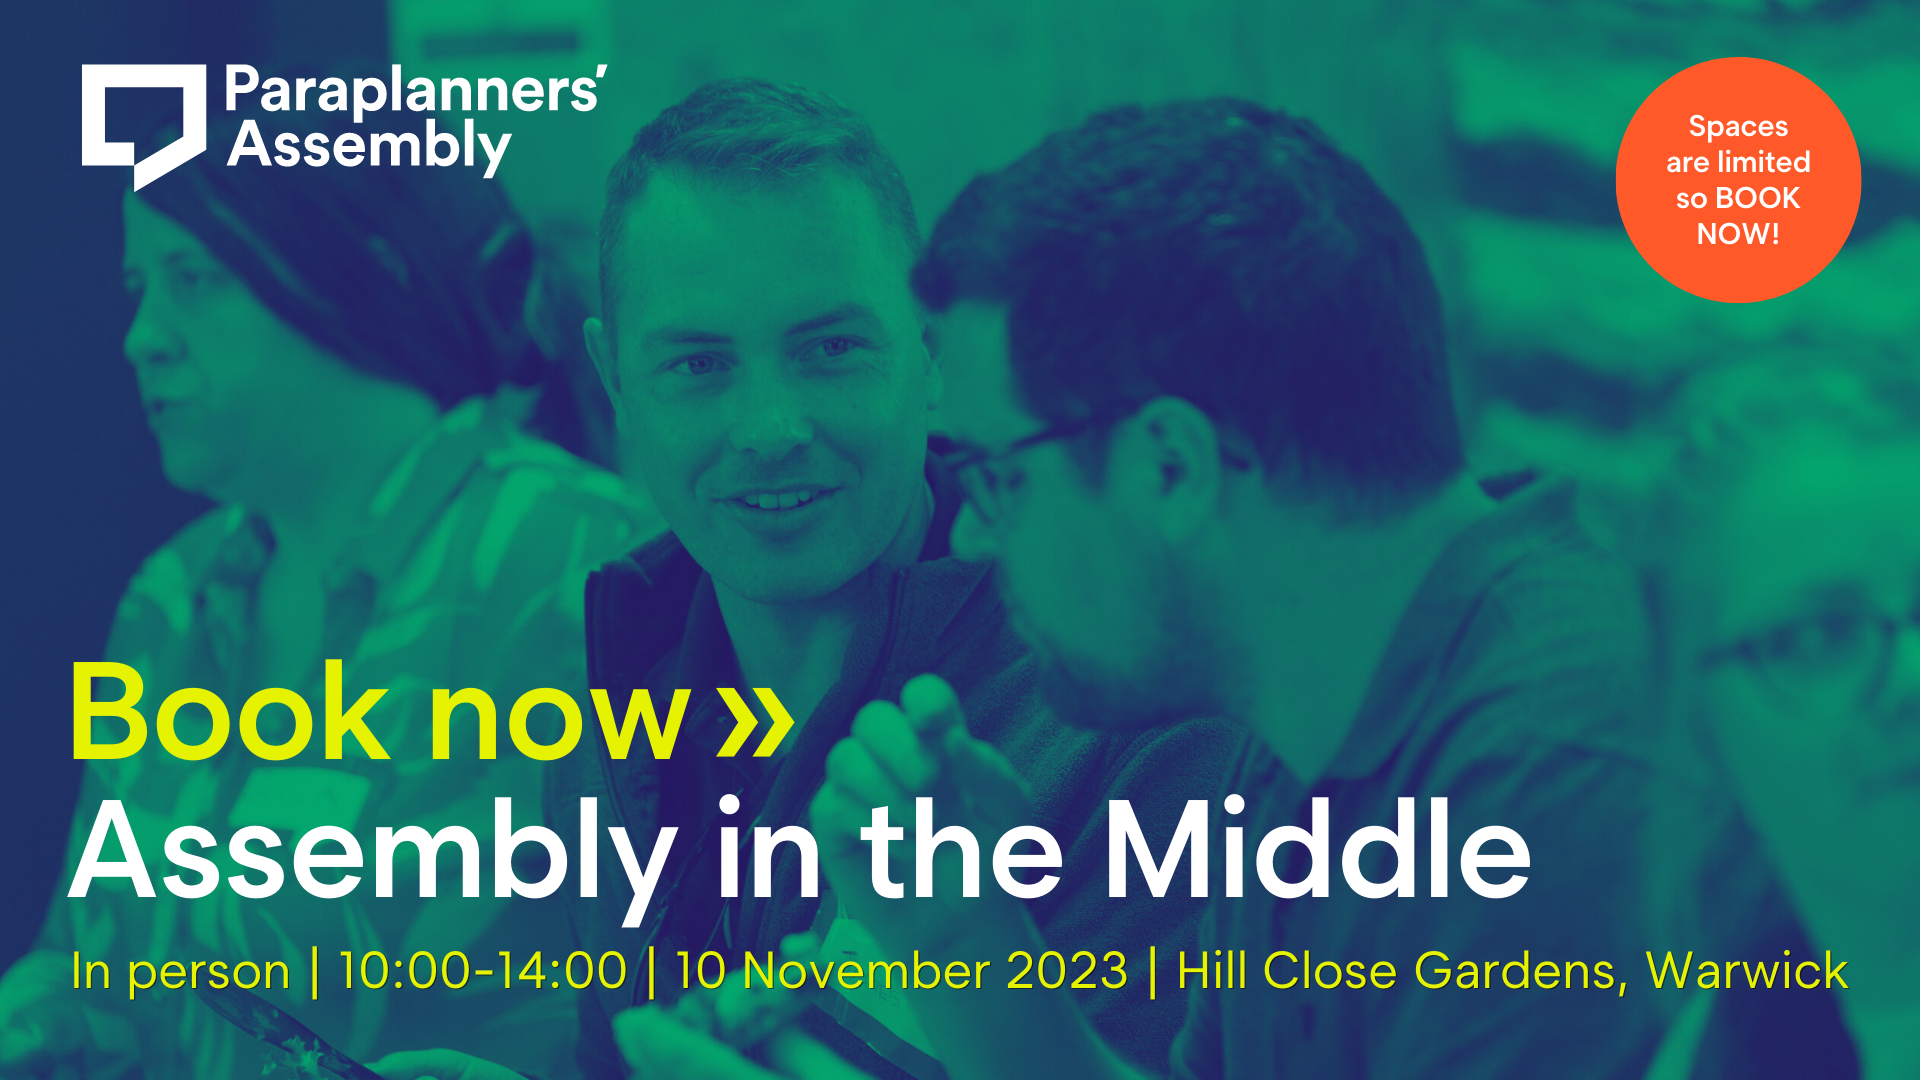 Book now: Assembly in the Middle. In person from 10am until 2pm on 10th November 2023 at Hill Close Gardens in Warwick. Spaces are limited so book now!